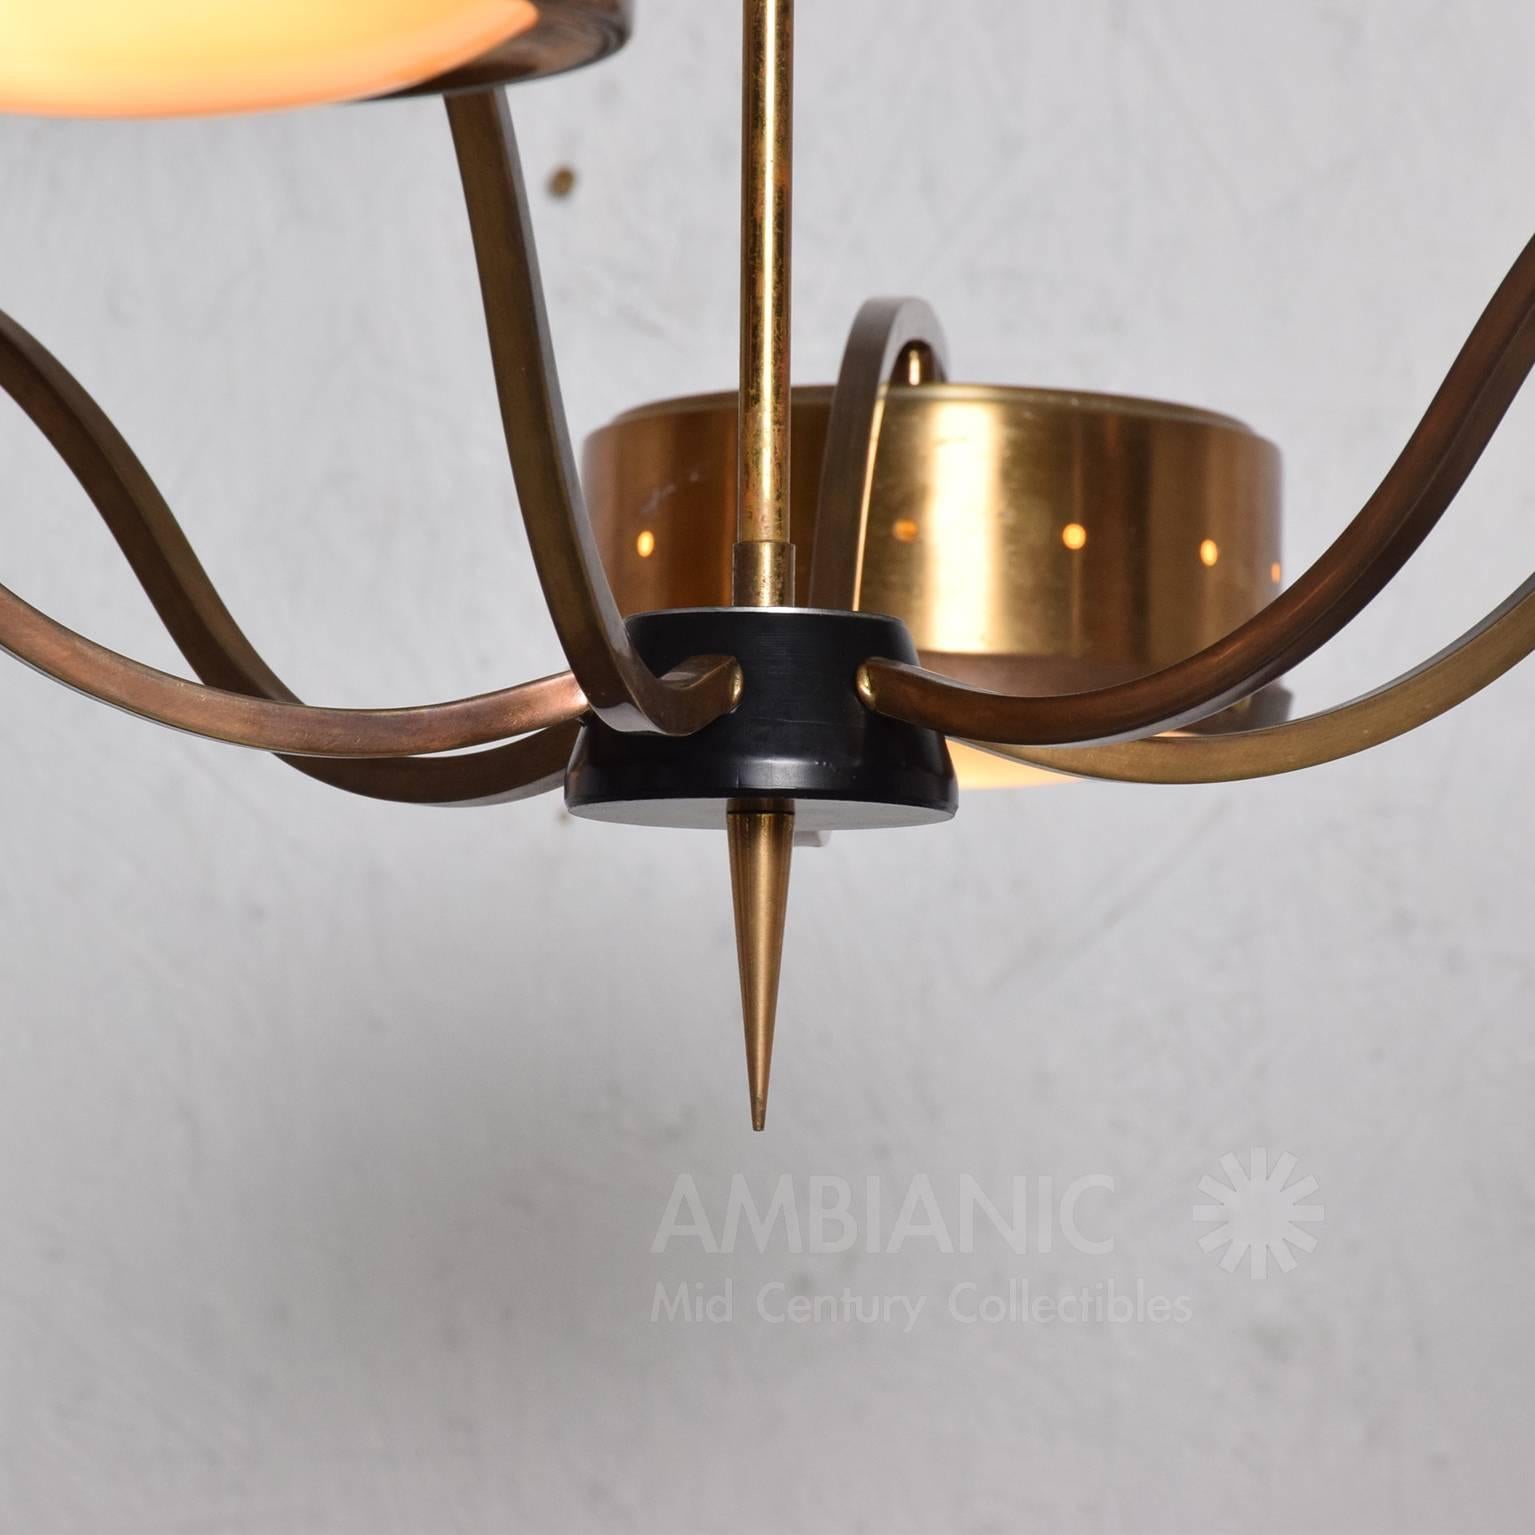 Mid-20th Century Mid-Century Modern Sculptural Chandelier with Six Arms